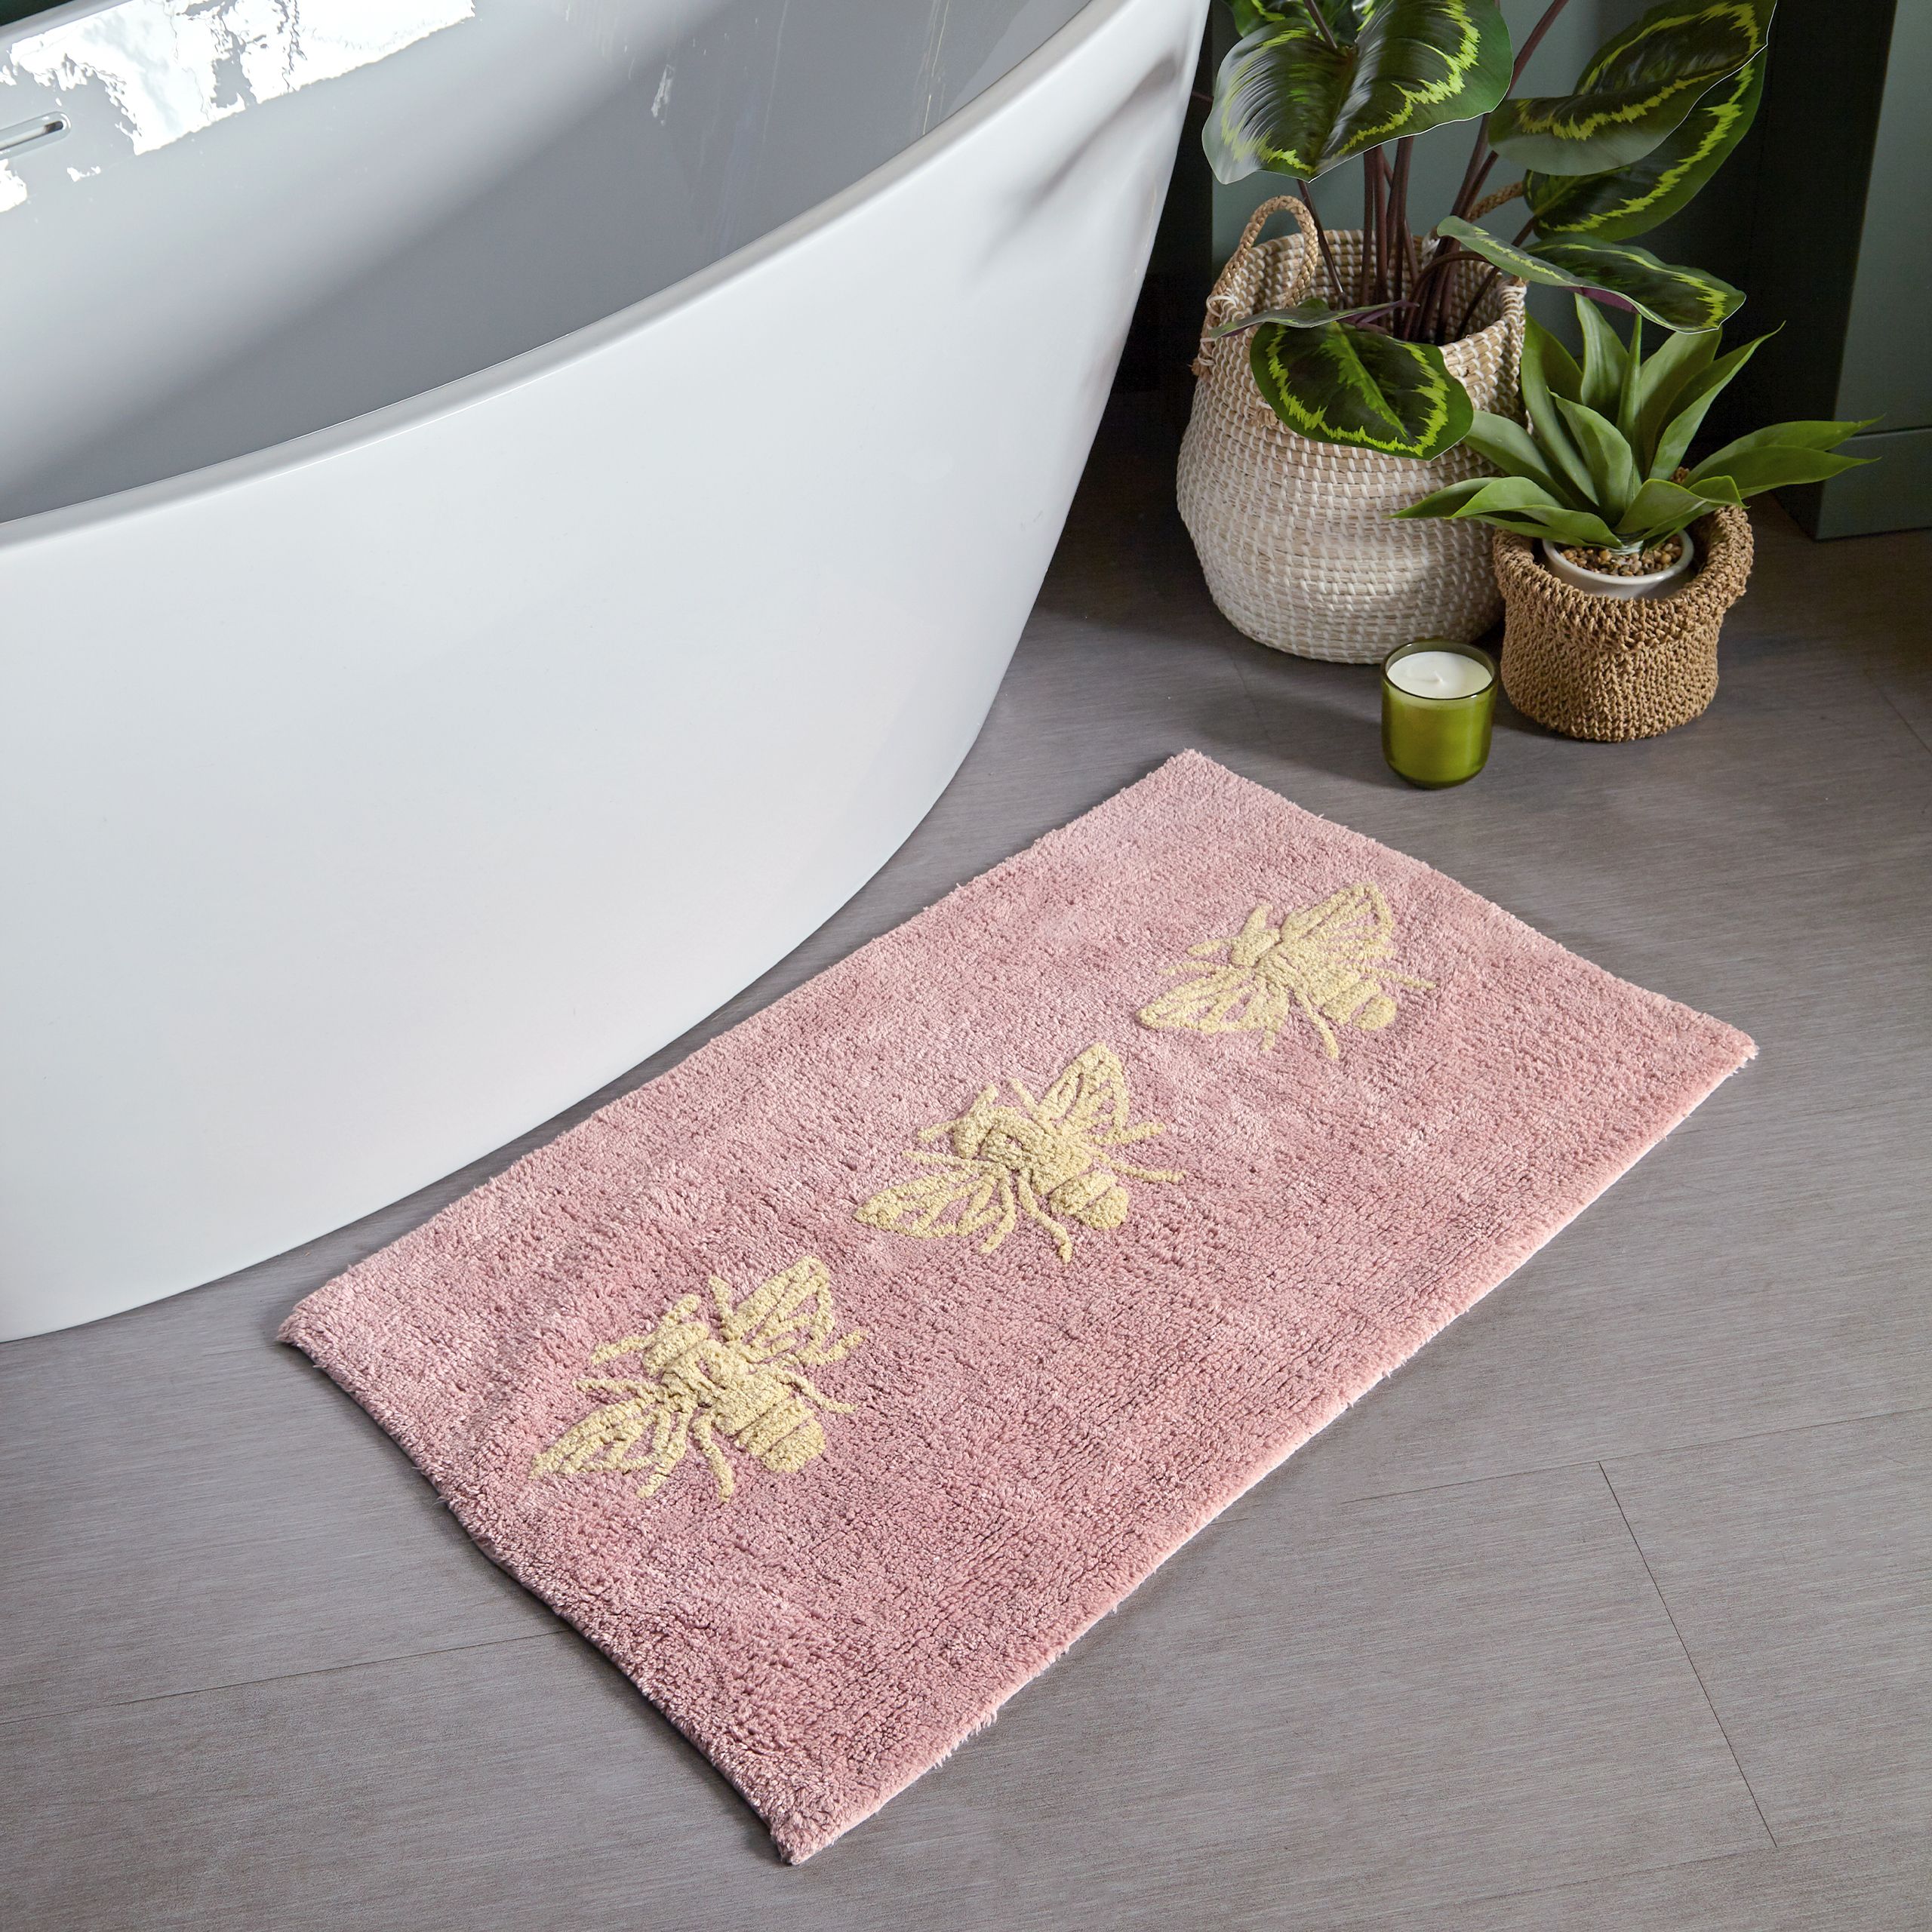 Featuring a tufted Bumblebee design on a blush pink cotton fabric. Made from 100% Cotton, making this bath mat incredibly soft under foot. This bath mat has an anti-slip quality, keeping it securely in place on your bathroom floor. The 1800 GSM ensures this bath mat is super absorbent preventing post-bath or shower puddles.